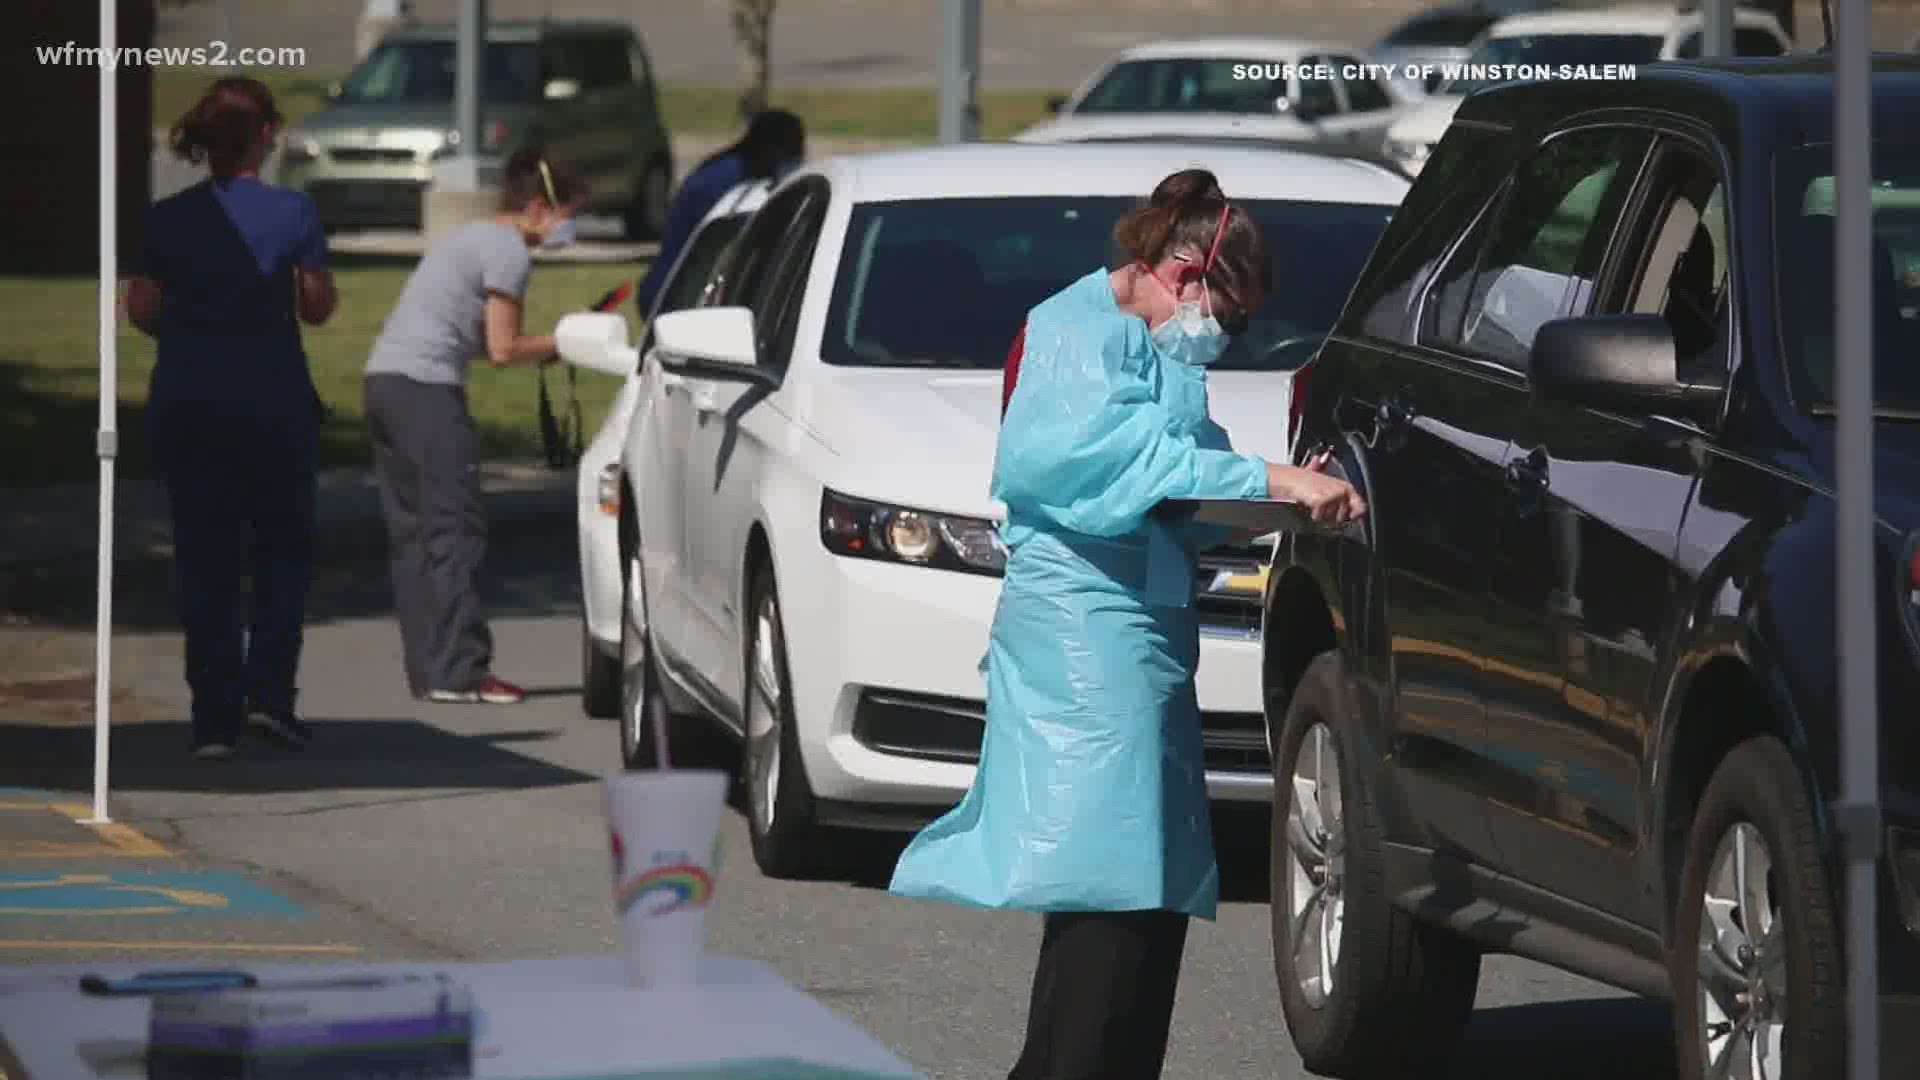 The location on Lansing Drive in Winston-Salem saw many folks trying to get tested for coronavirus.